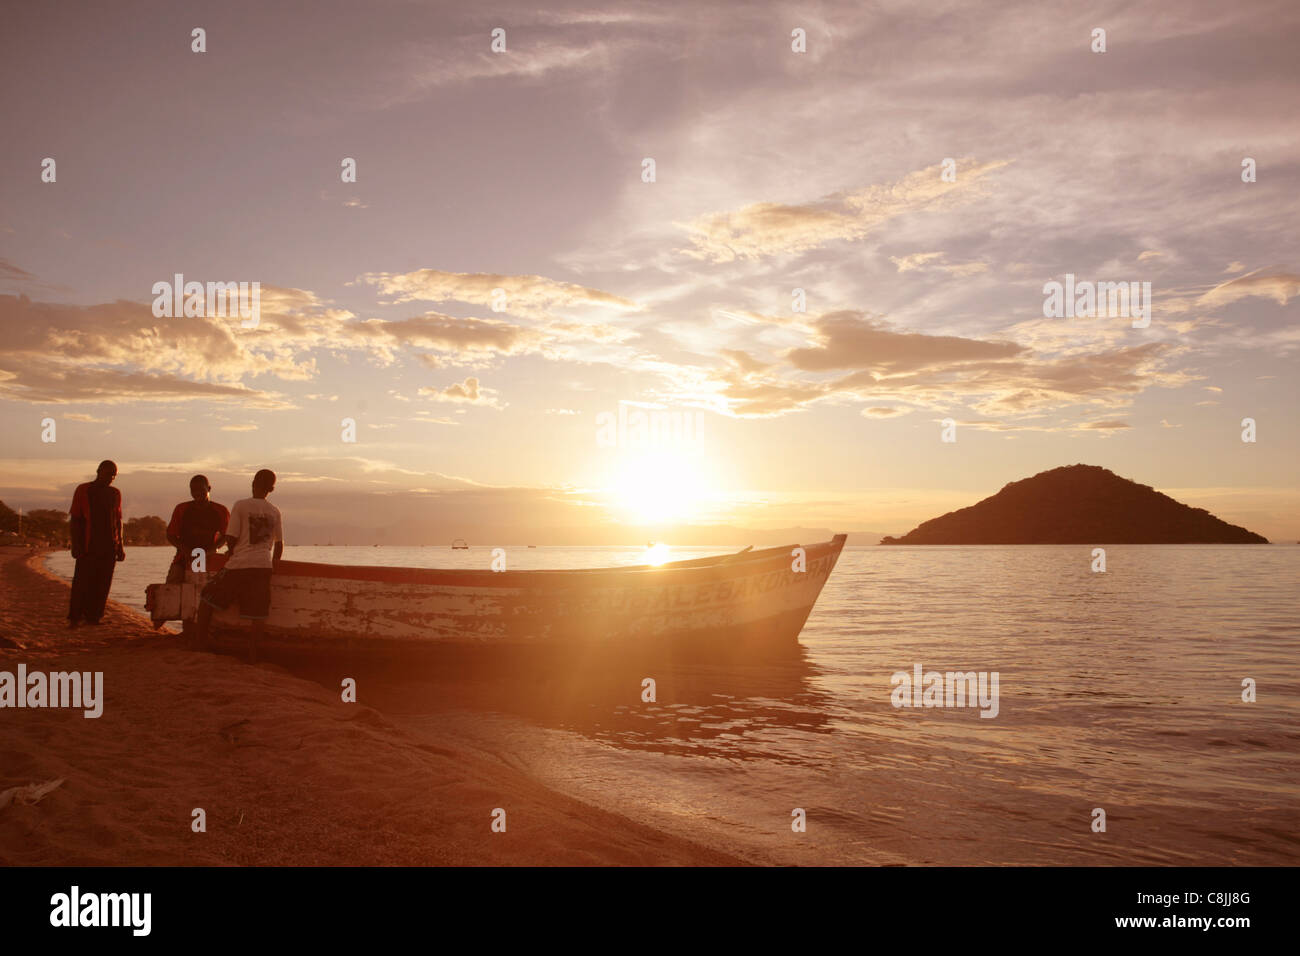 Sunset at Cape Maclear on the shores of Lake Malawi in Malawi. Stock Photo